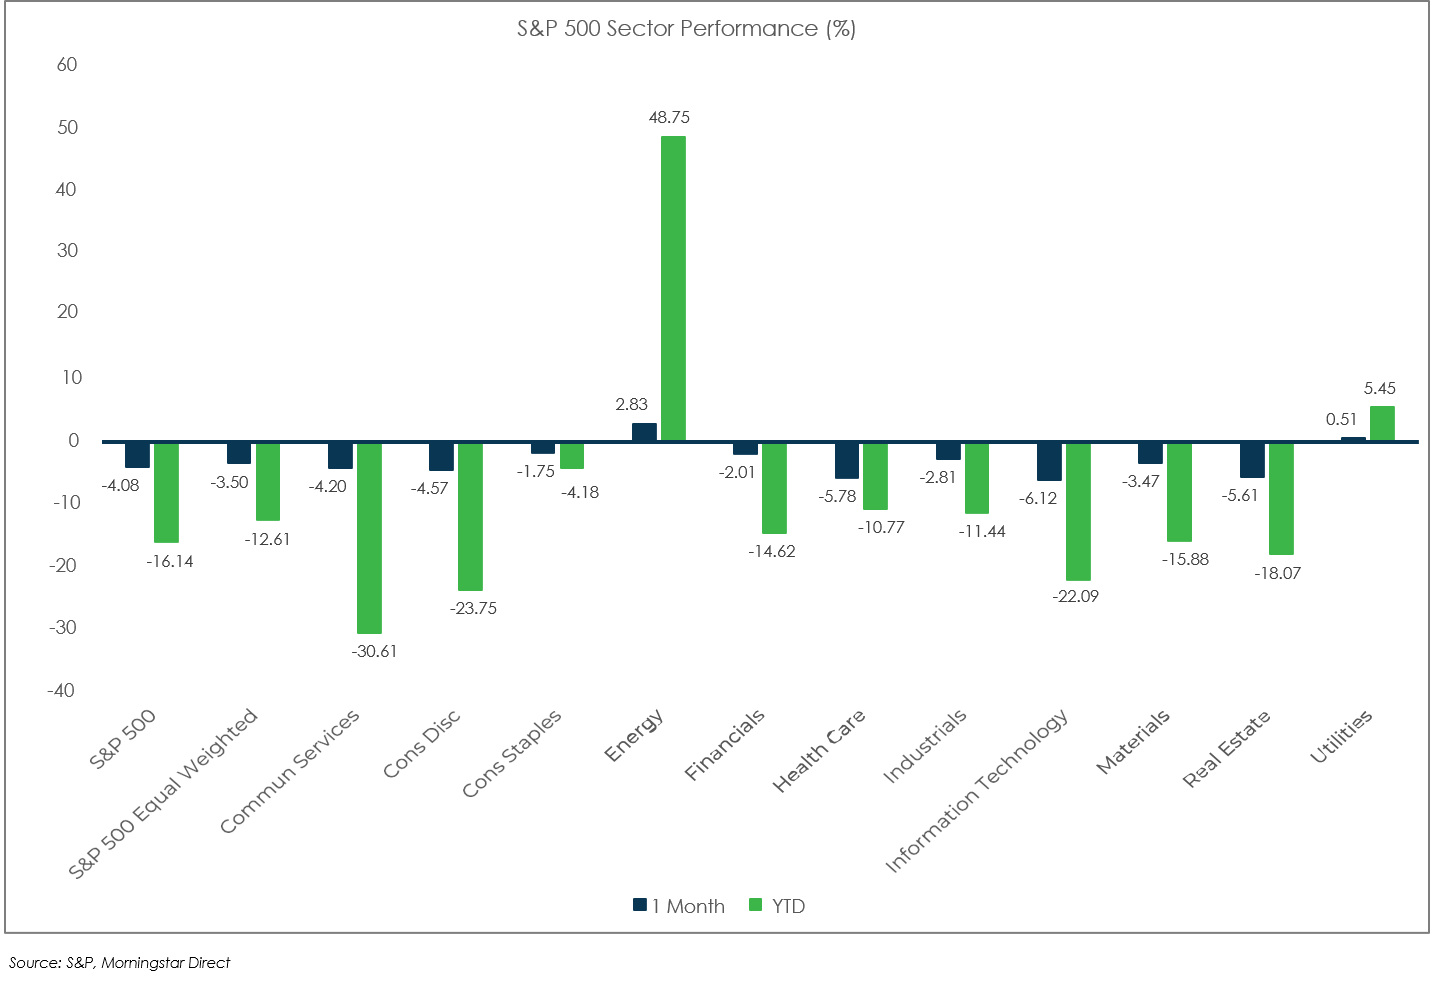 Sector Performance: S&P 500 - August 2022